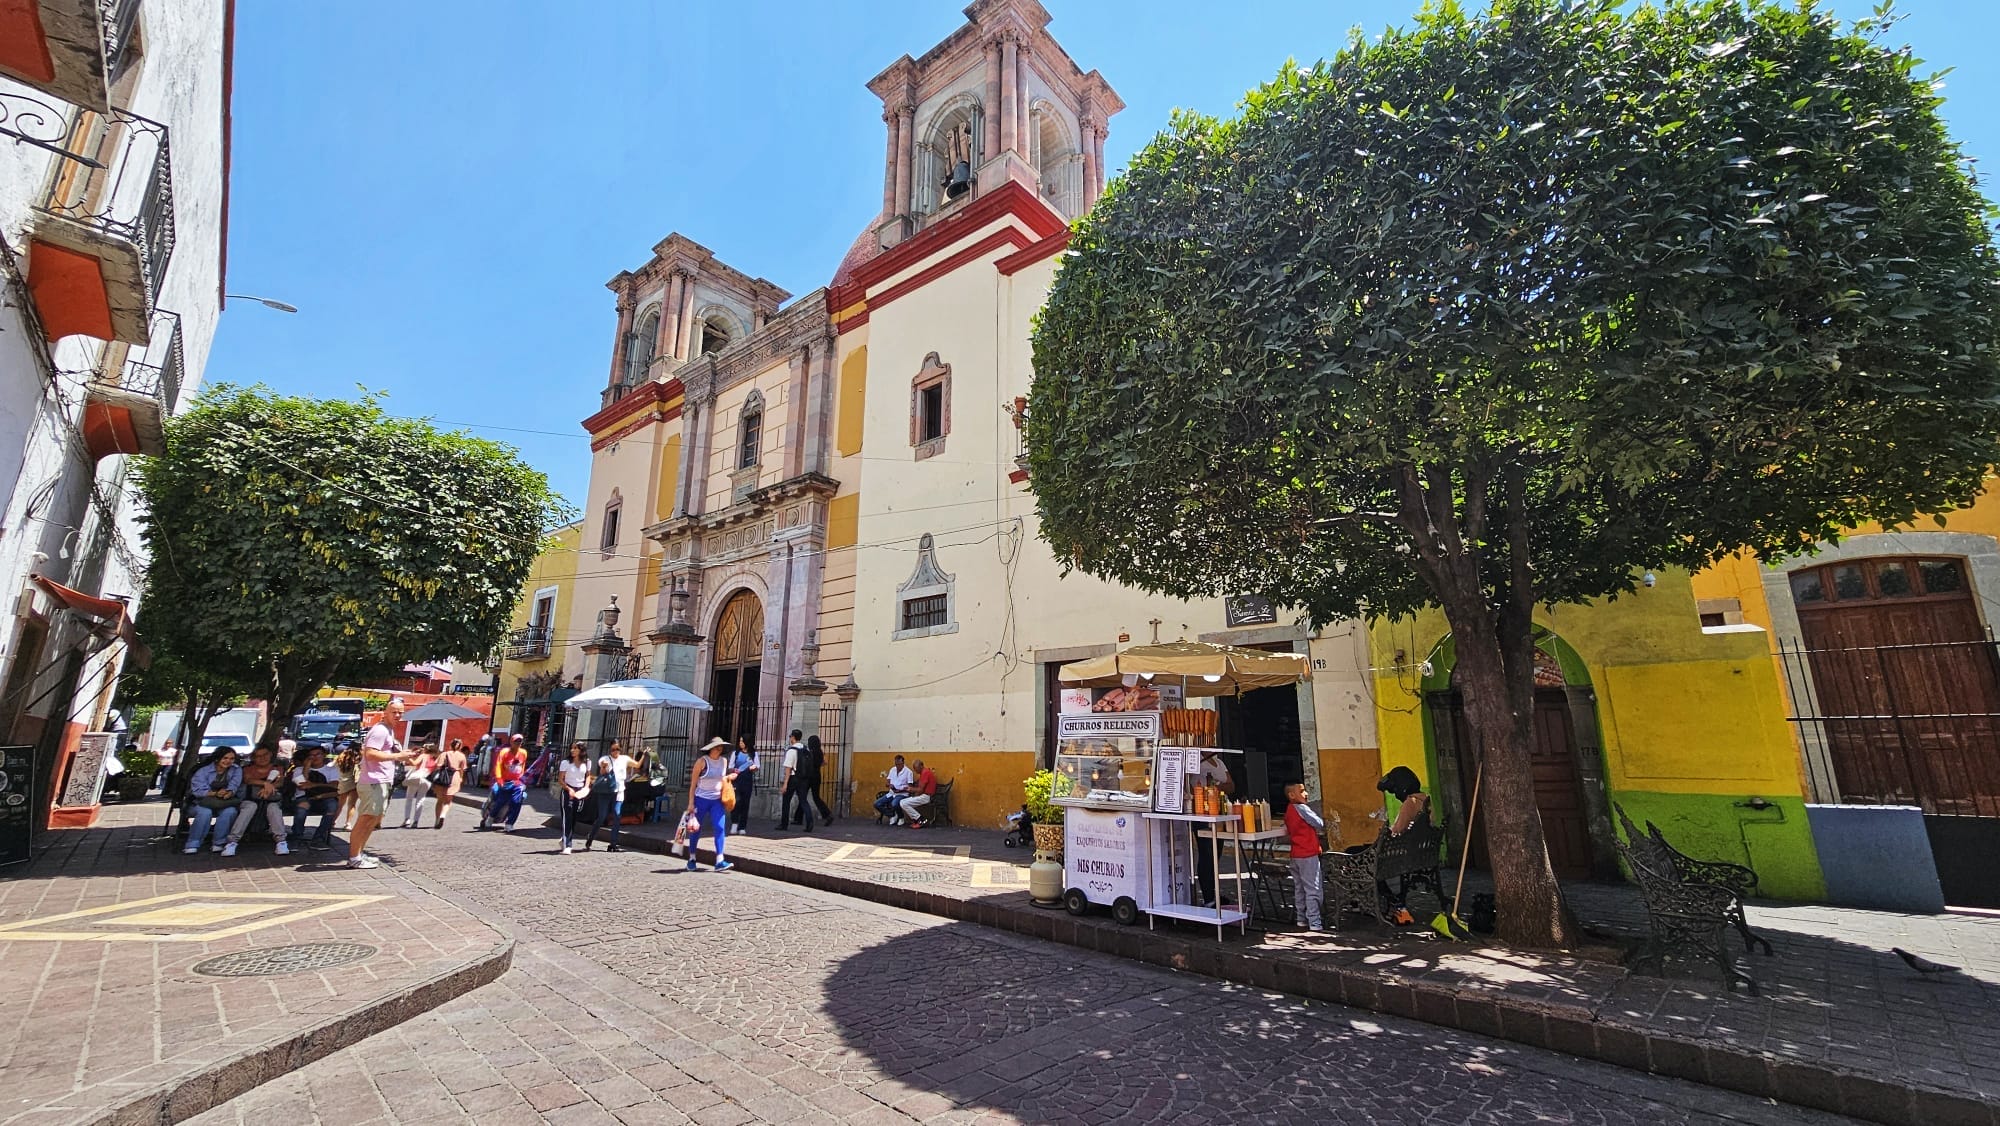 Guanajuato City and San Miguel - which is better to visit?